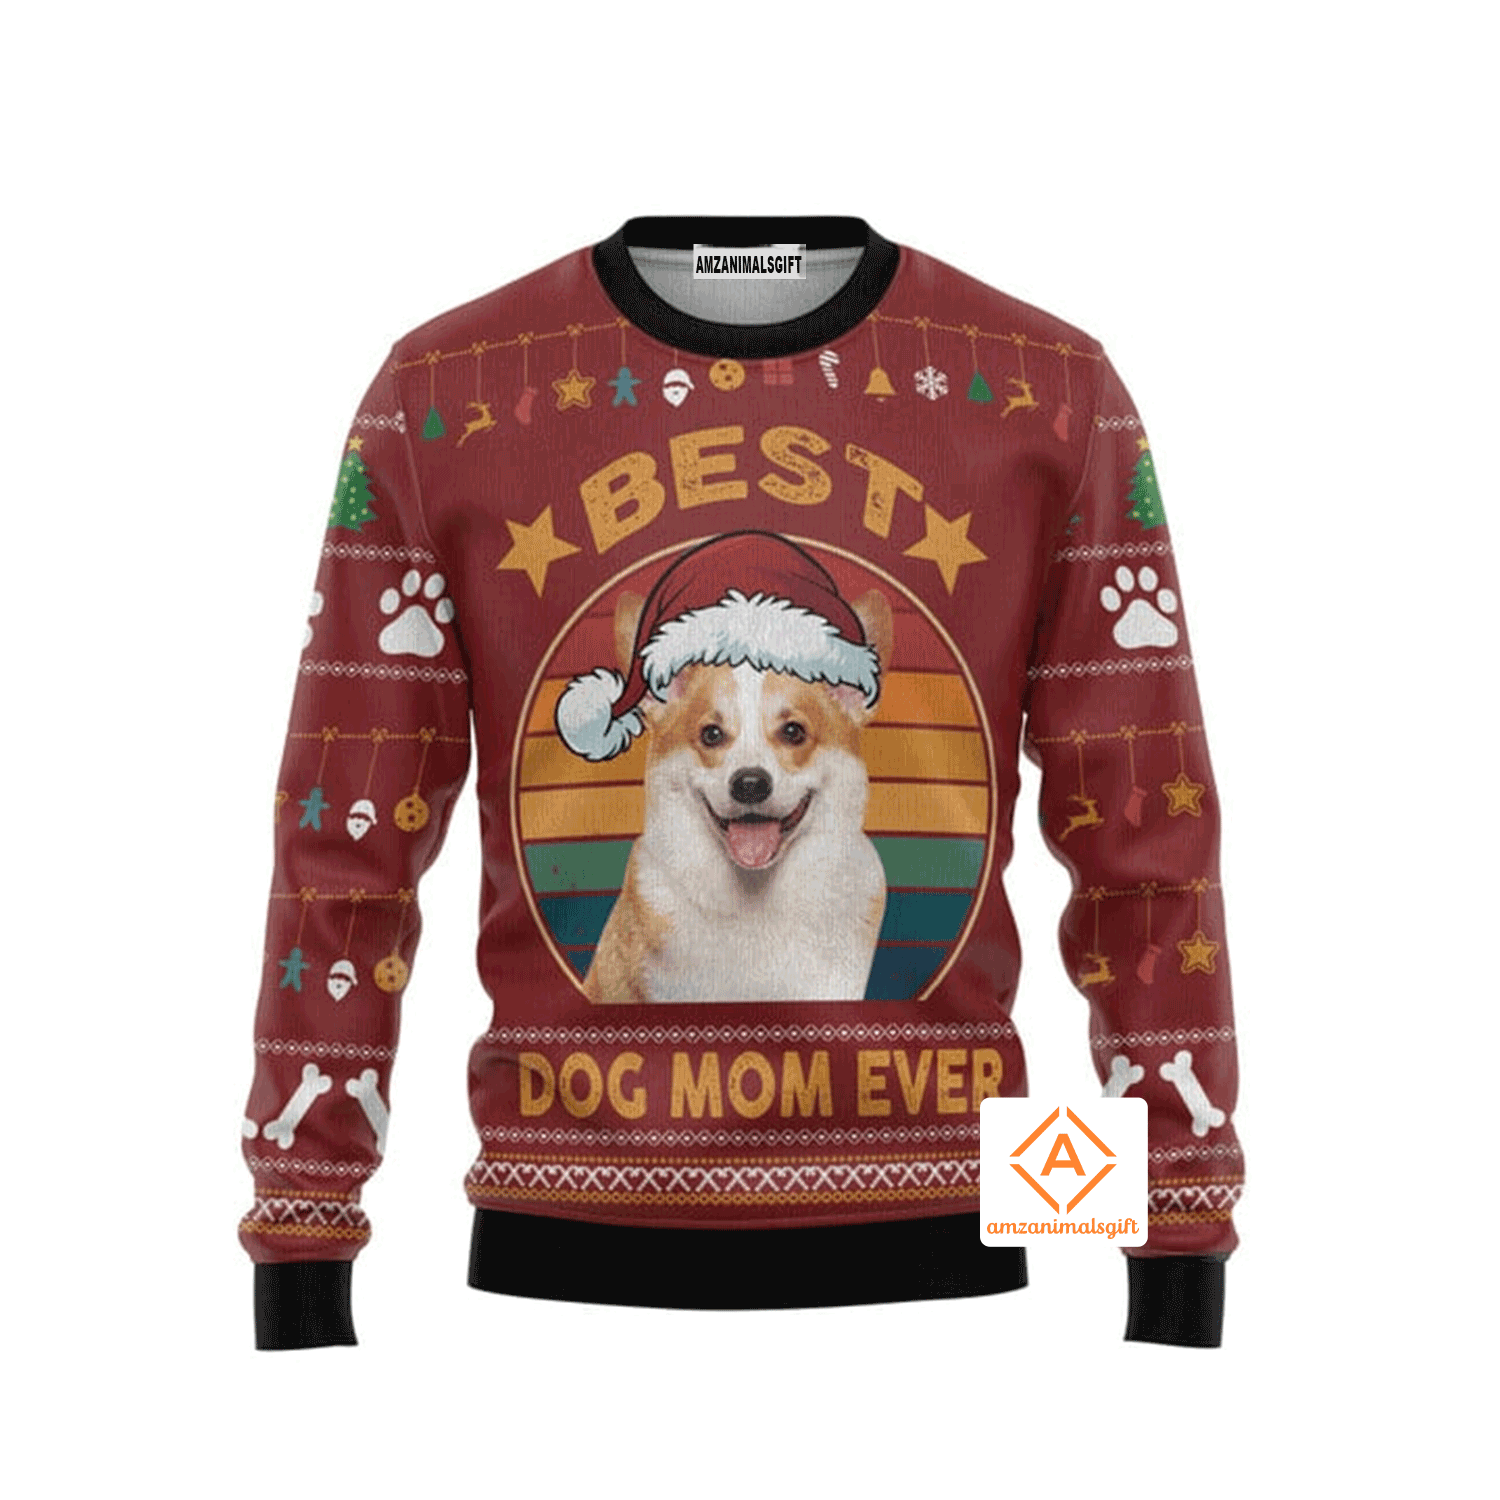 Cardigan Welsh Corgi Christmas Sweater Best Dog Mom Ever, Ugly Sweater For Men & Women, Perfect Outfit For Christmas New Year Autumn Winter